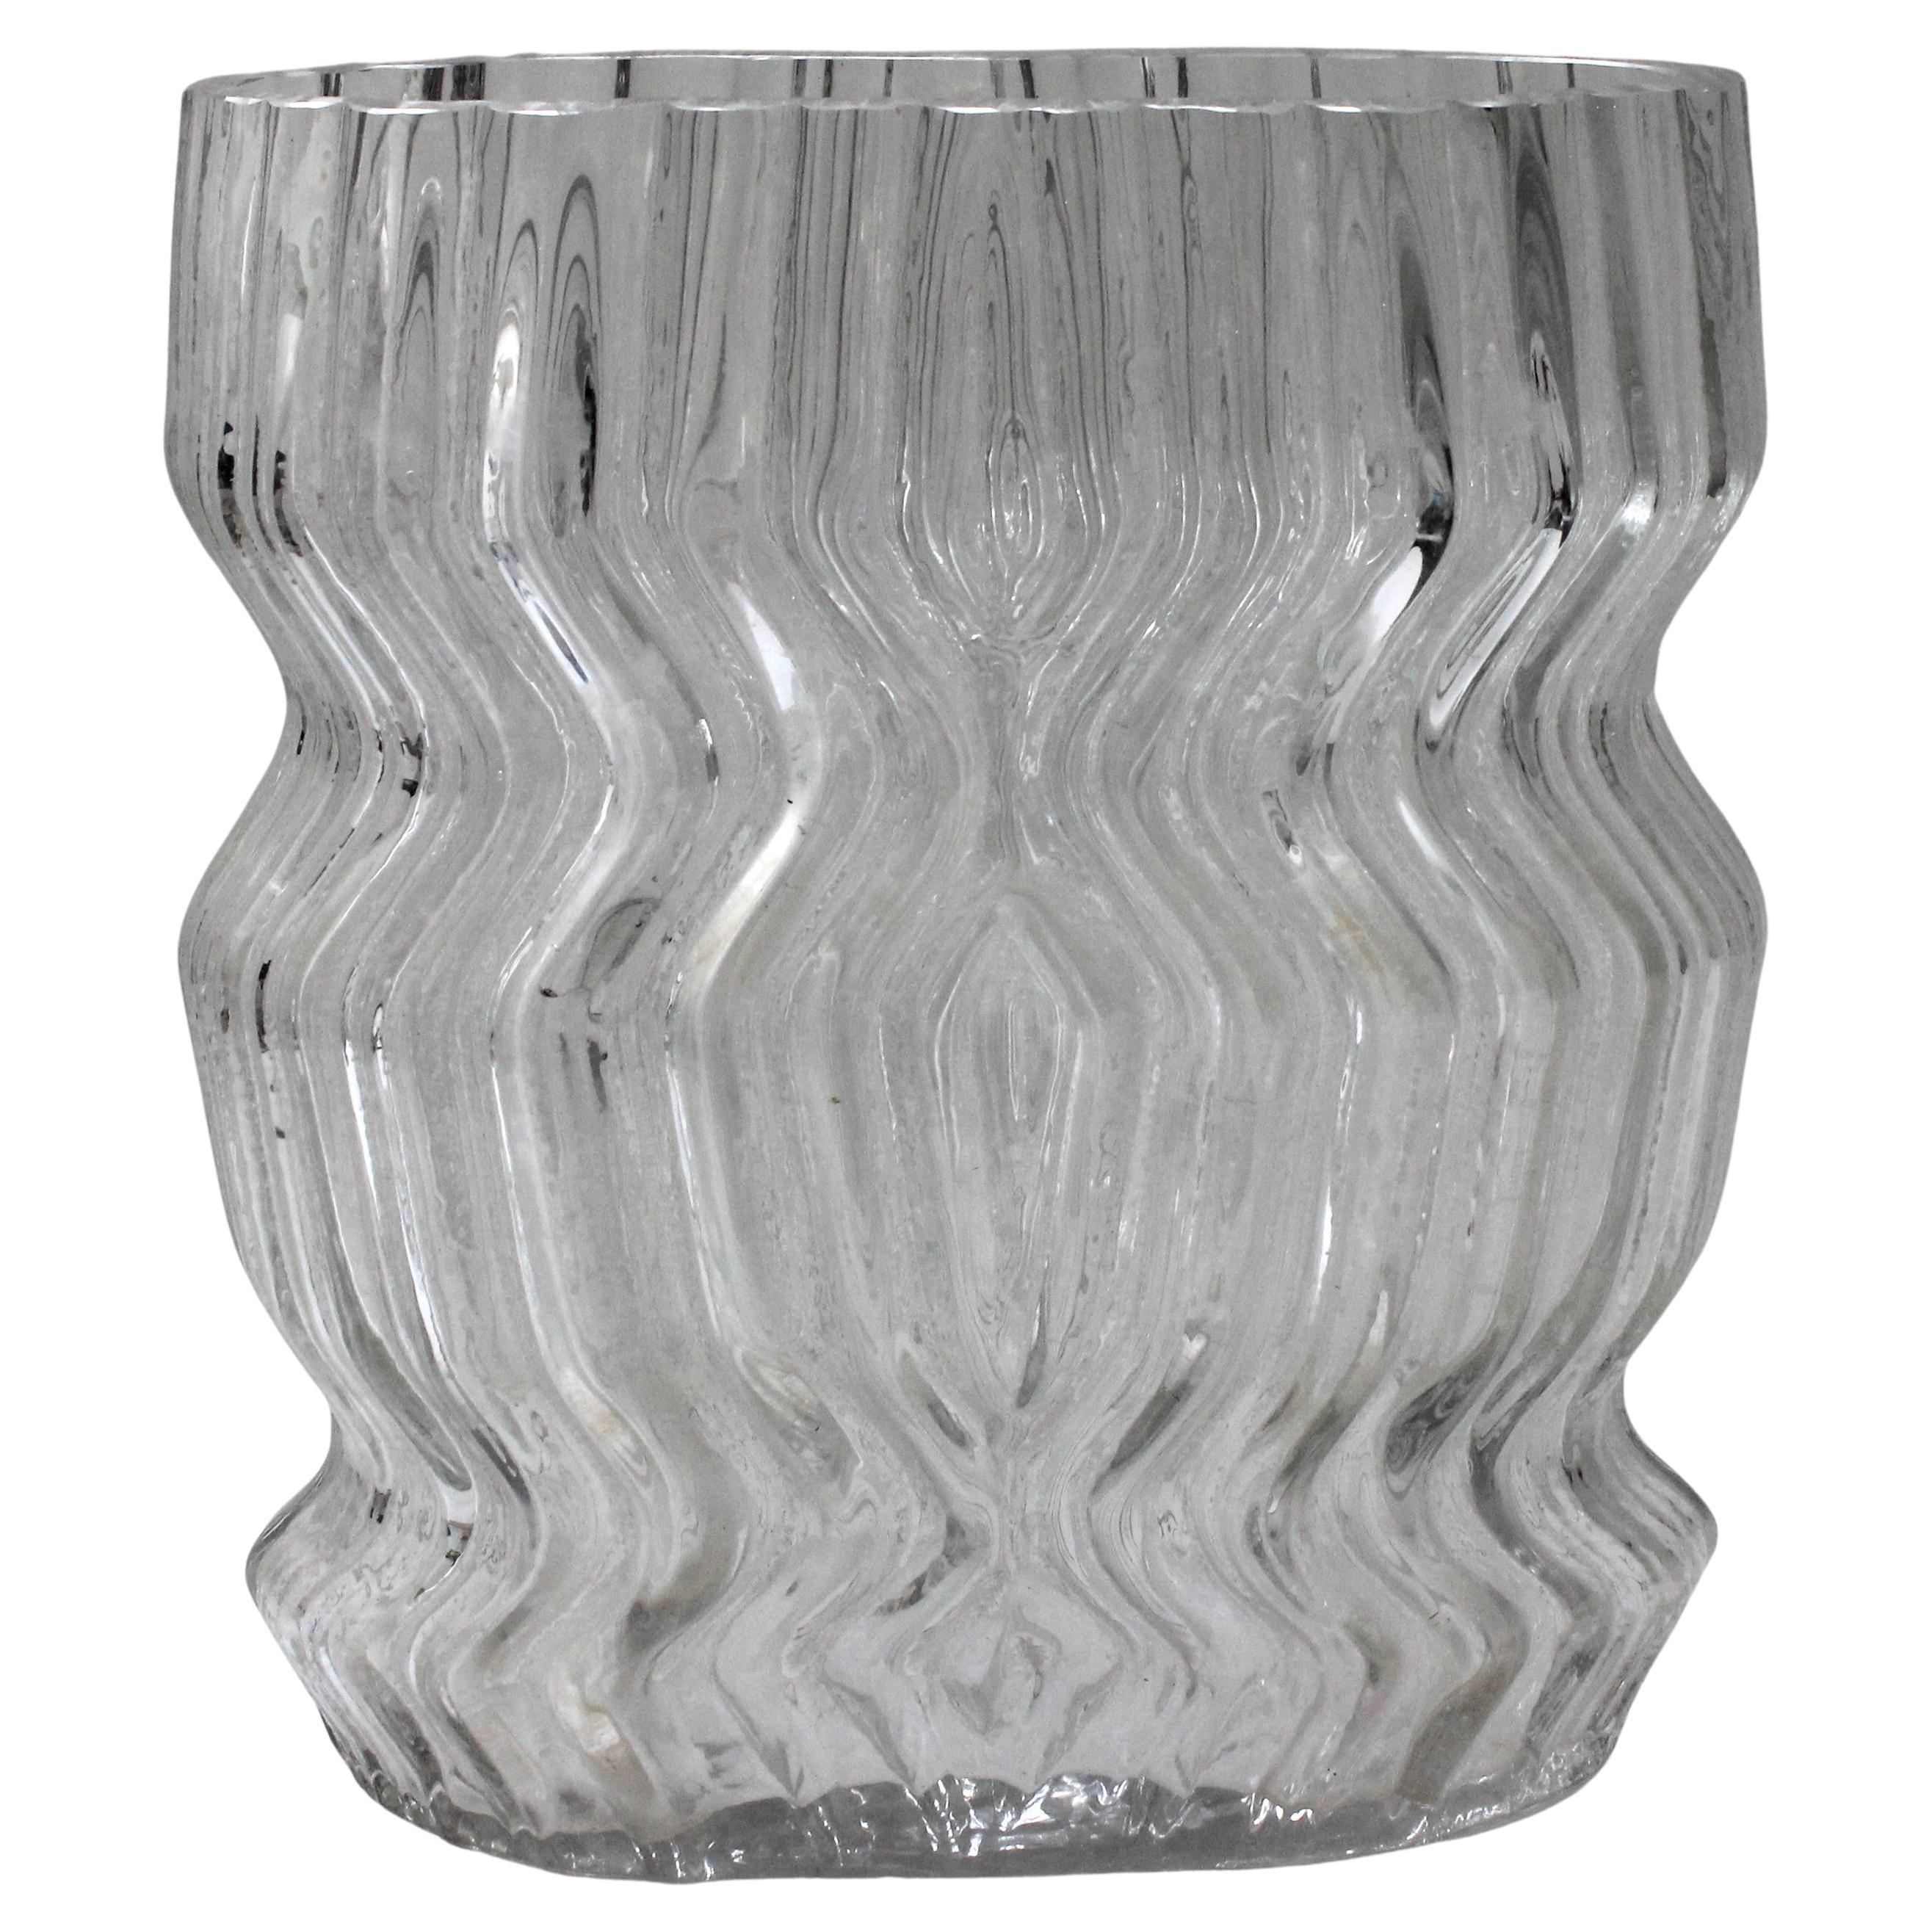 This large scale, stylish and chic glass 